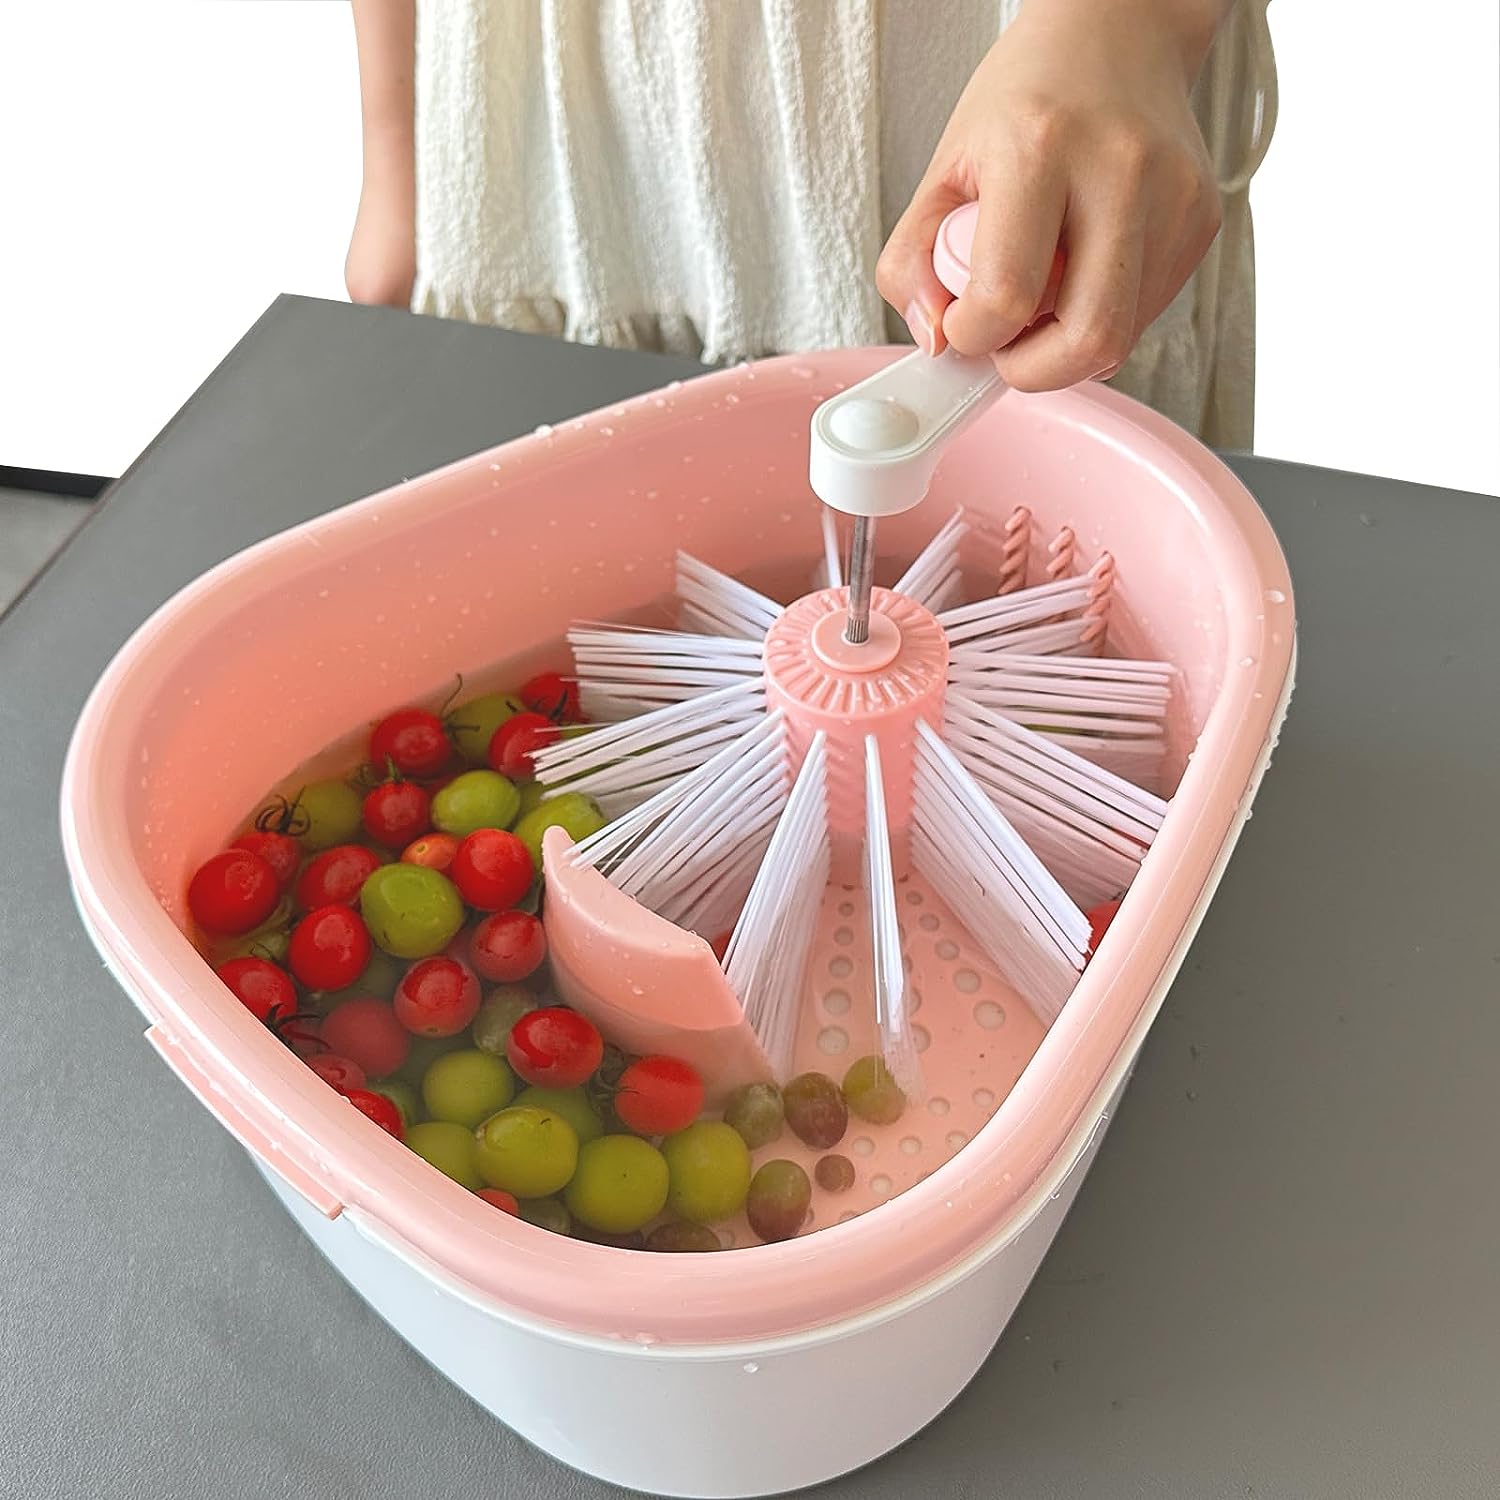 Fruit and Vegetable Washing Machine, Fruit and Vegetable Cleaner, Salad  Spinner INCLUDED, Veggie and Produce Washer, fruits and Vegetables  Purifier